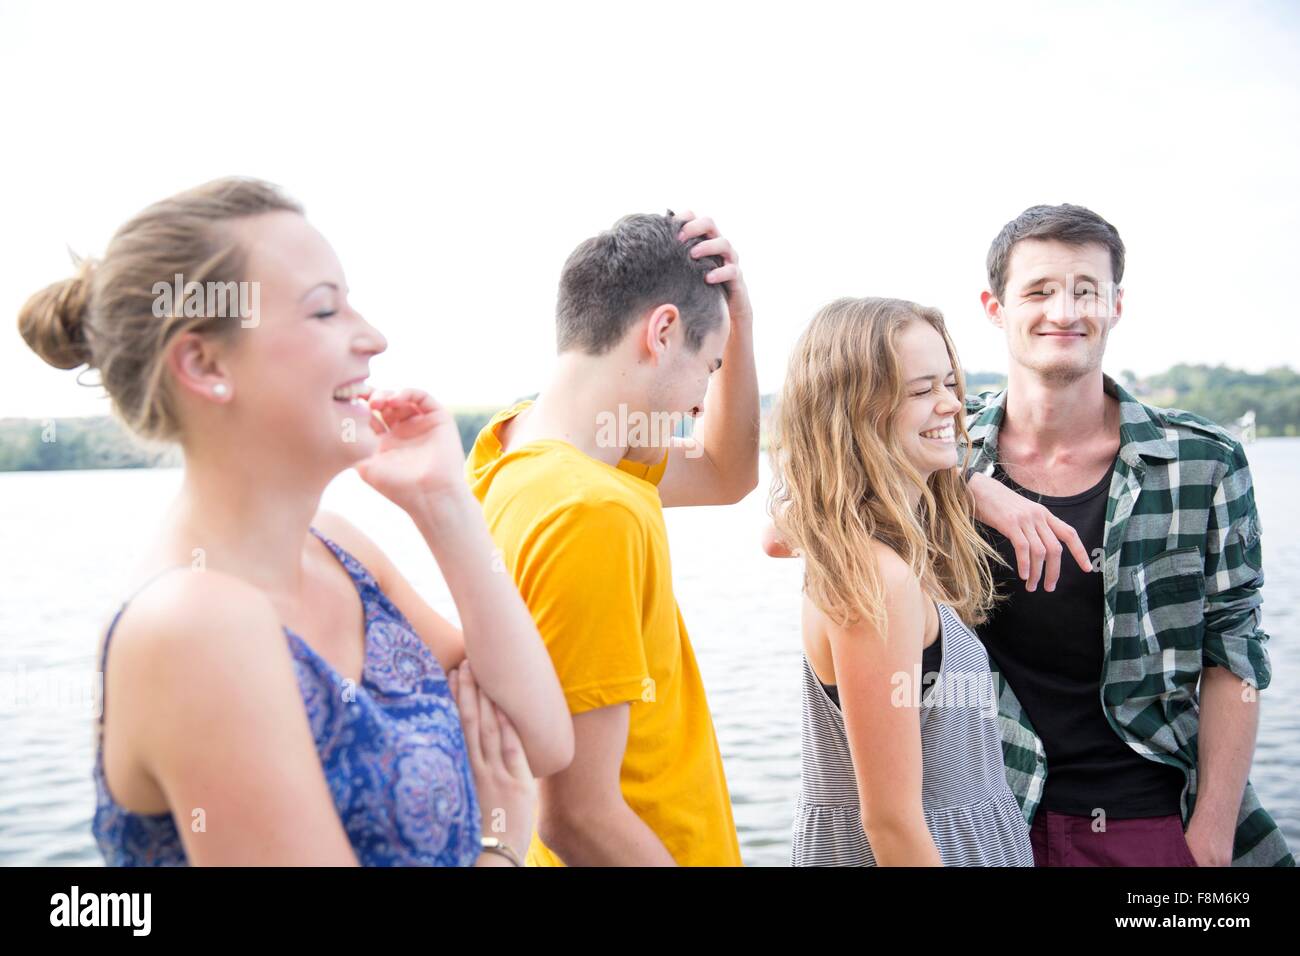 Group of young adults, outdoors, laughing Stock Photo